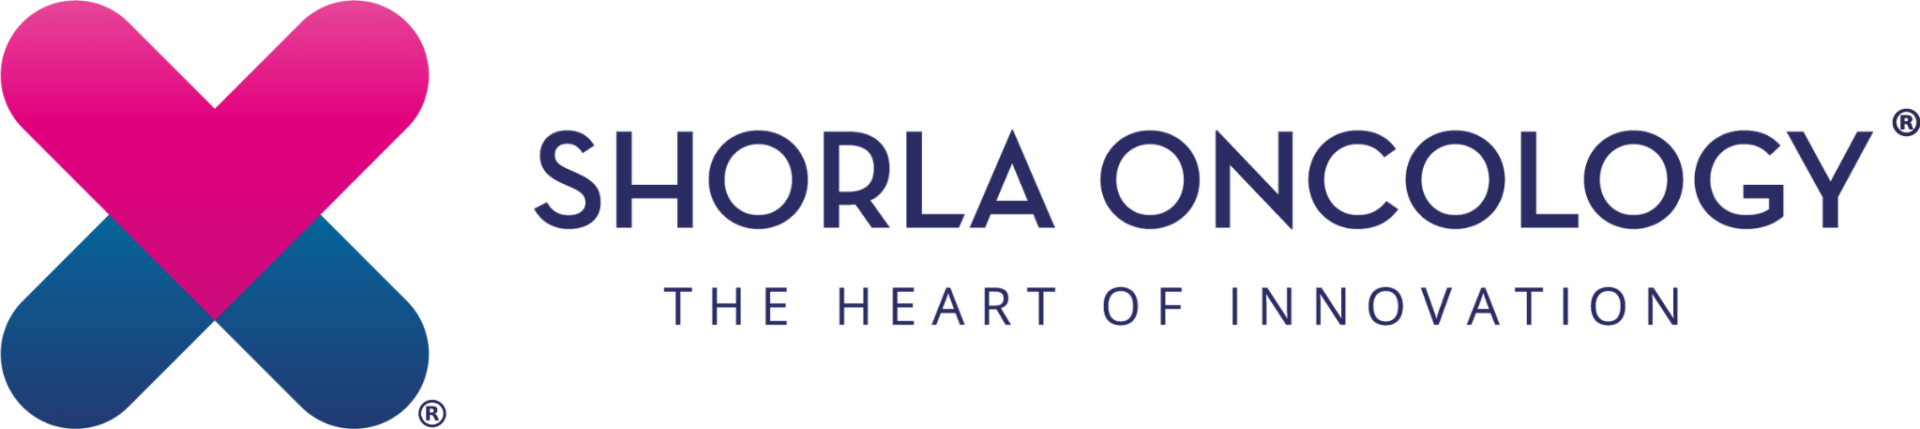 Shorla Oncology: A Leader in Innovative Oncology Solutions